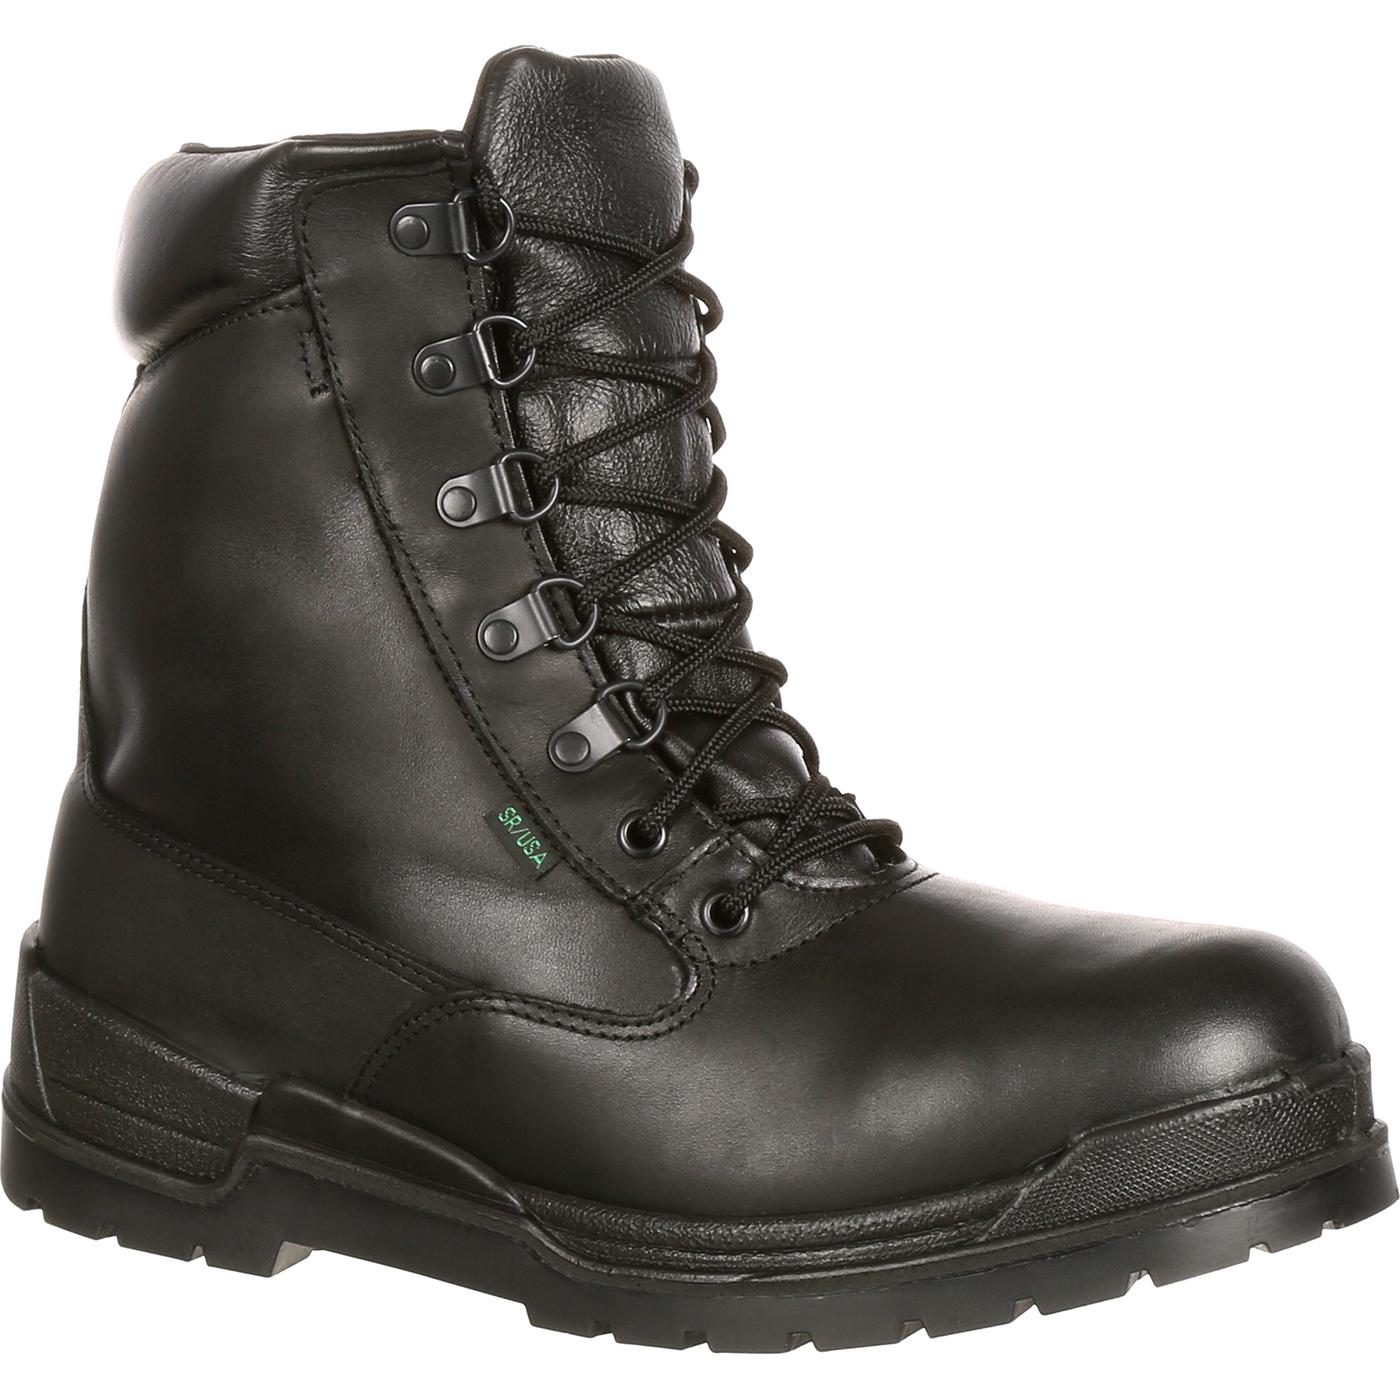 gore tex boots rocky eliminator gore-tex® waterproof 400g insulated duty boot, , large IECDXOB